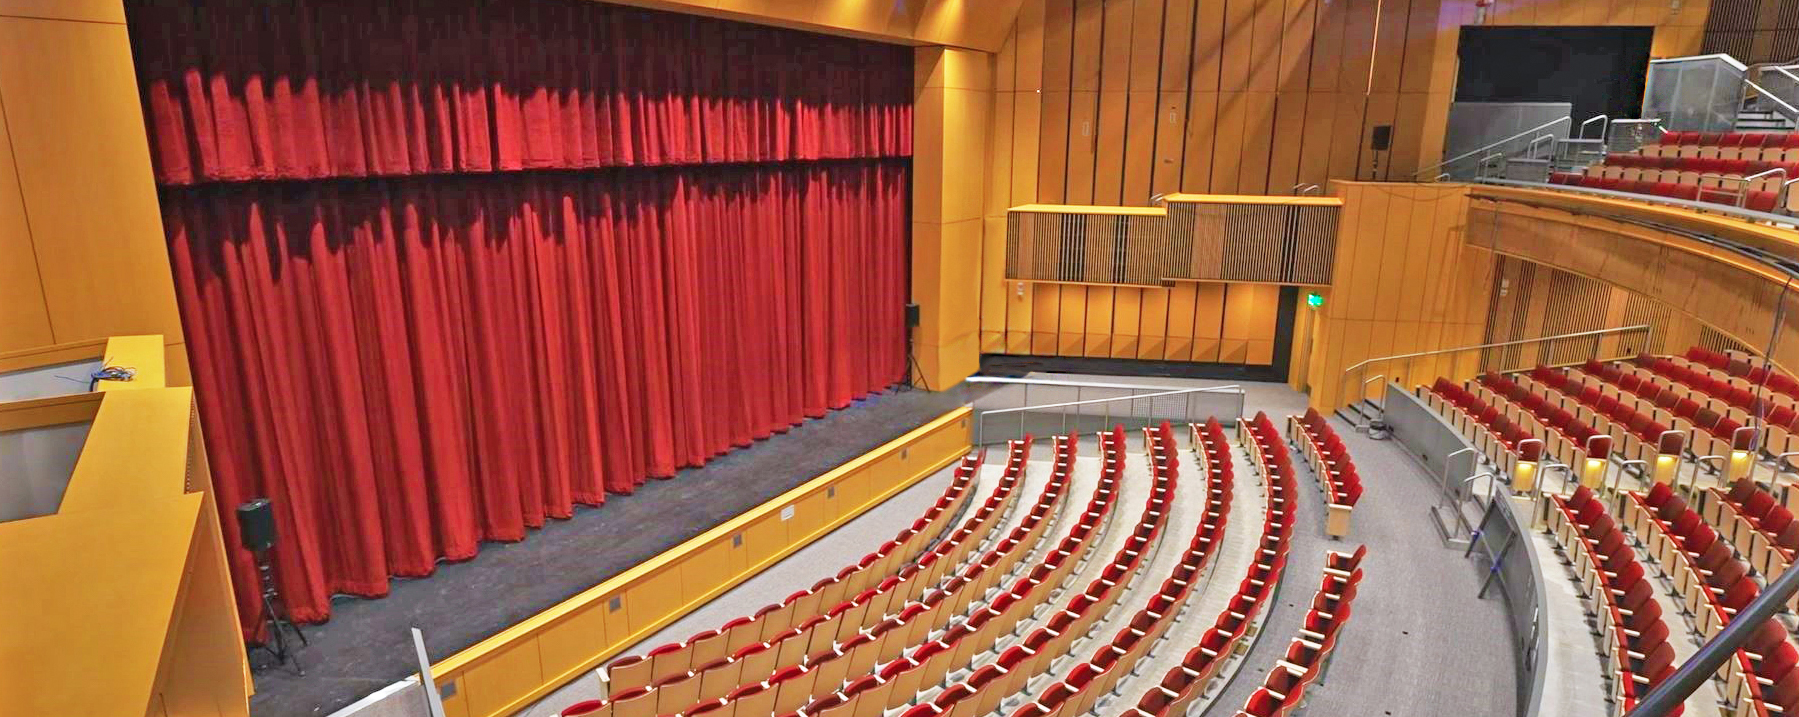 view of the stage and curtain inside an 850-seat auditorium with red seats, a balcony, and wood surroundings